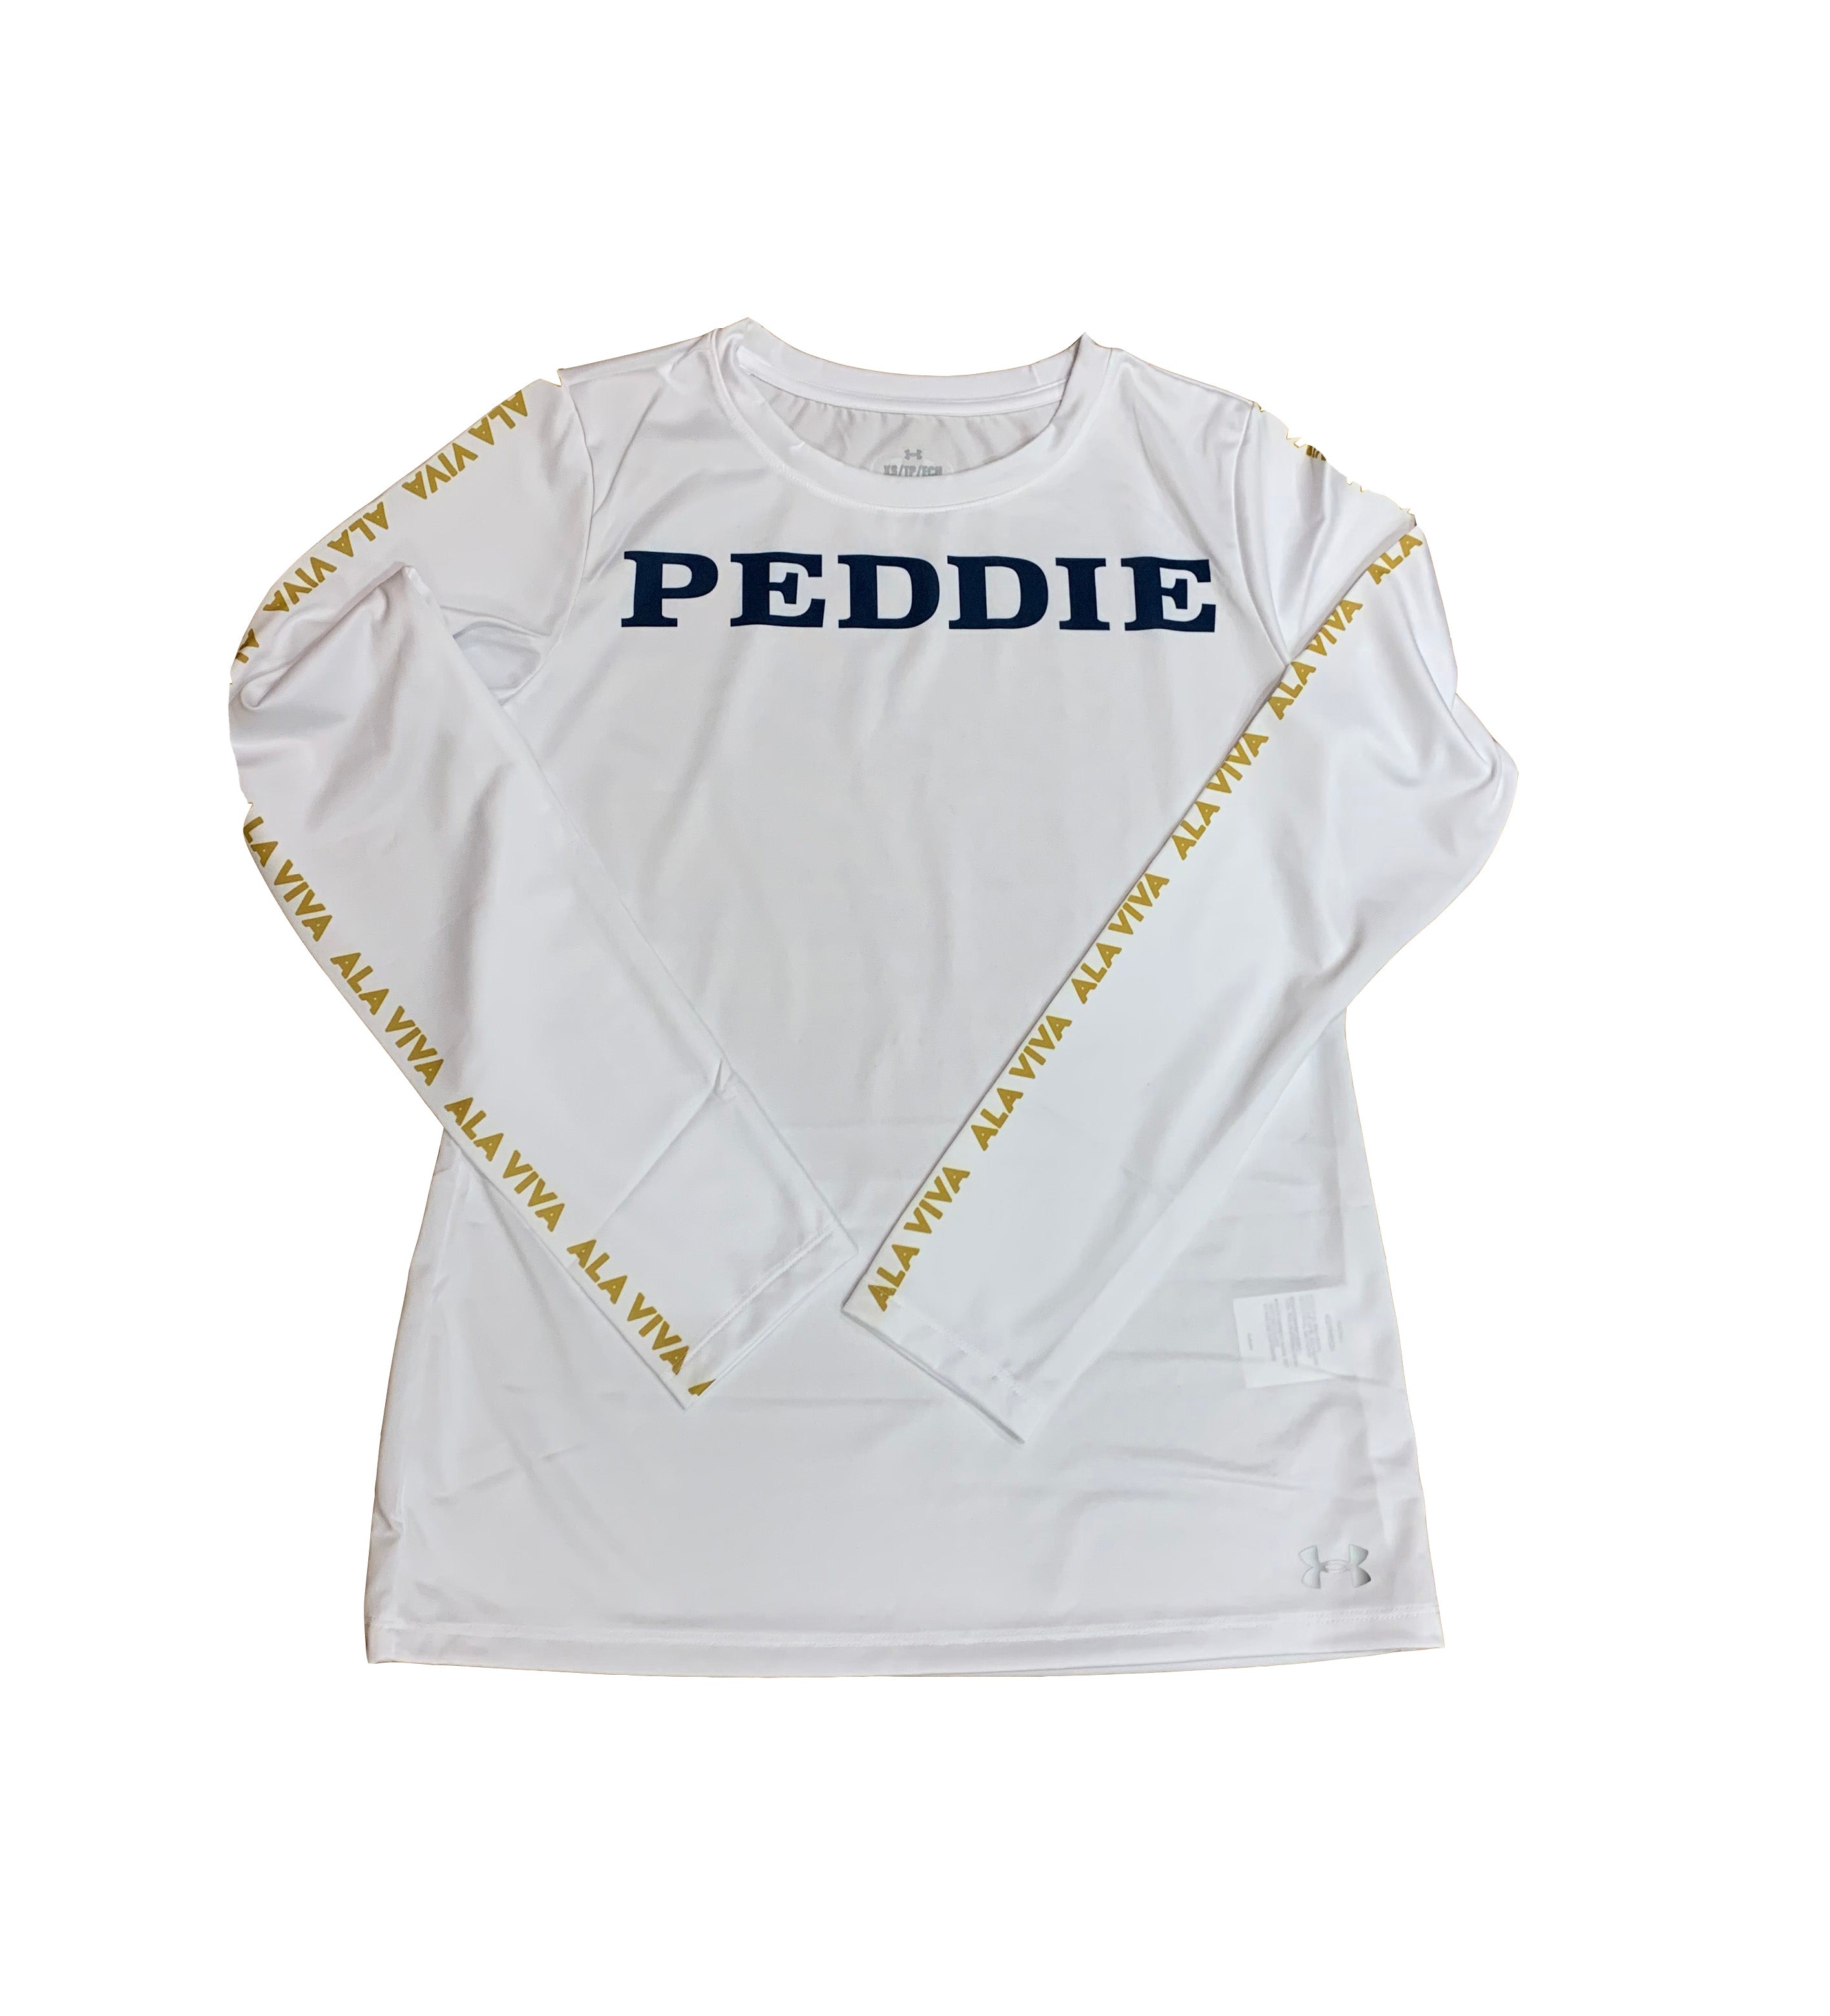 Under Armour Peddie Falcons Gameday Women's Long Sleeve Tee